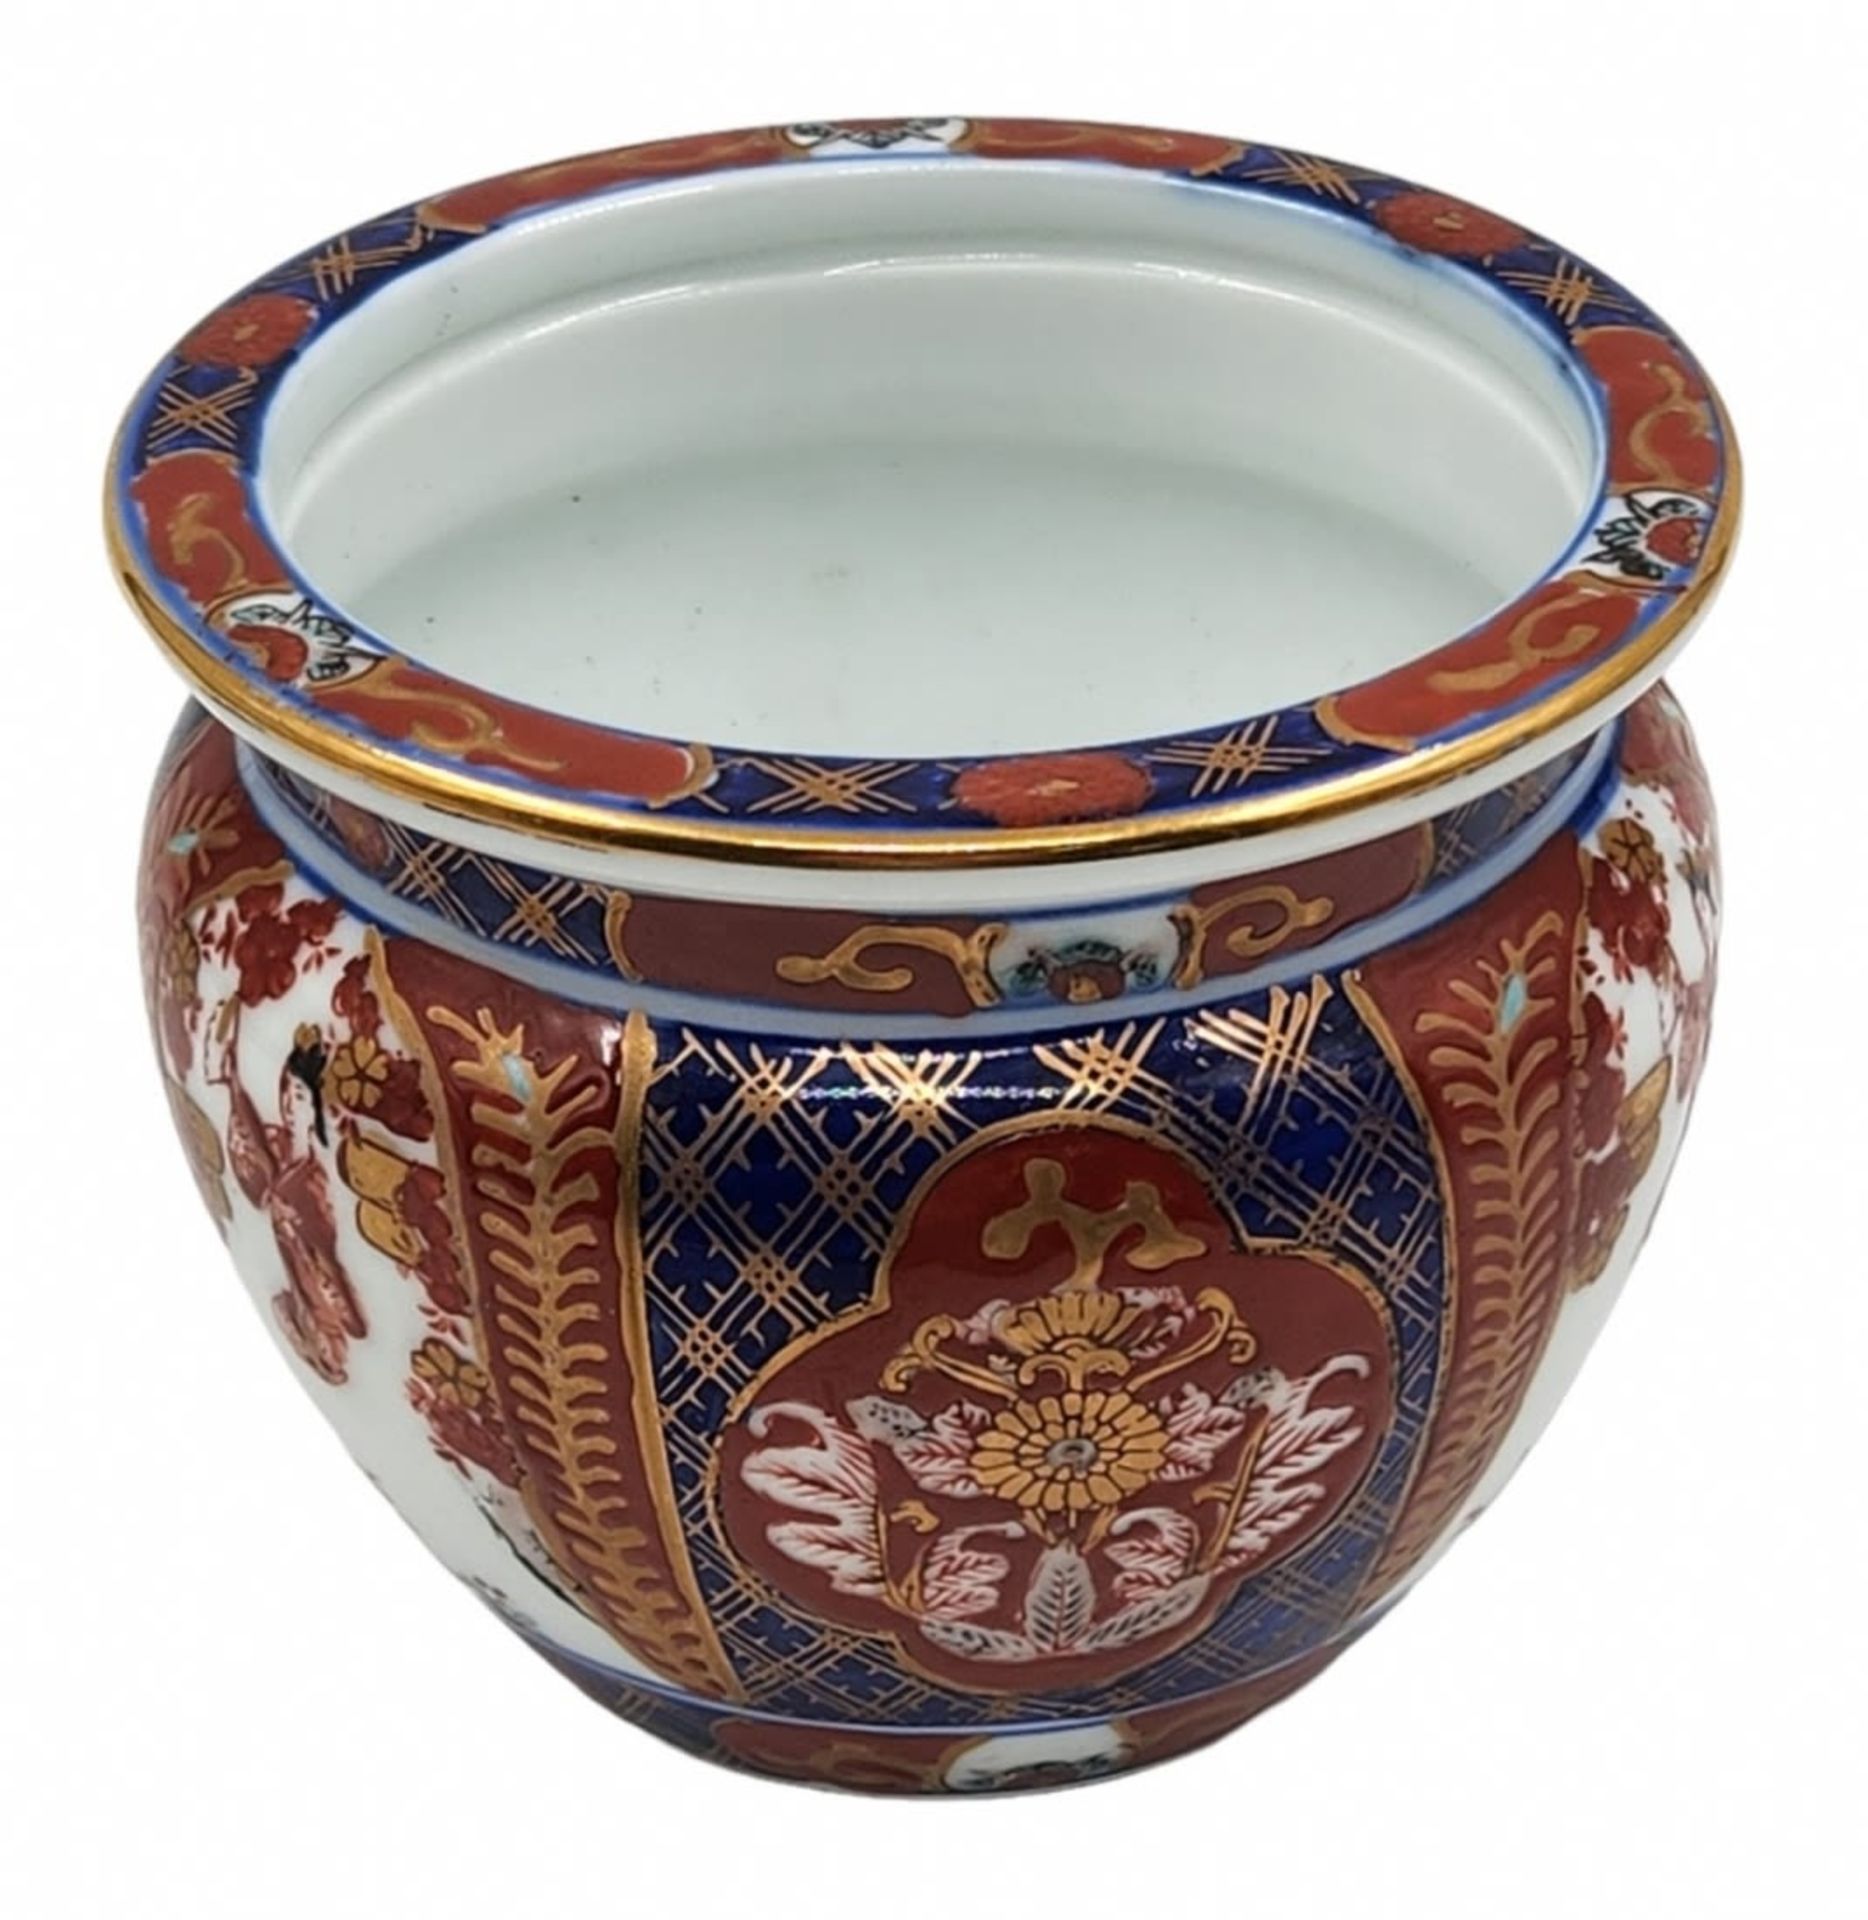 A small Japanese porcelain pot (Cache Pot) - Imari style, decorated with enamel and gold, signed. - Image 3 of 4